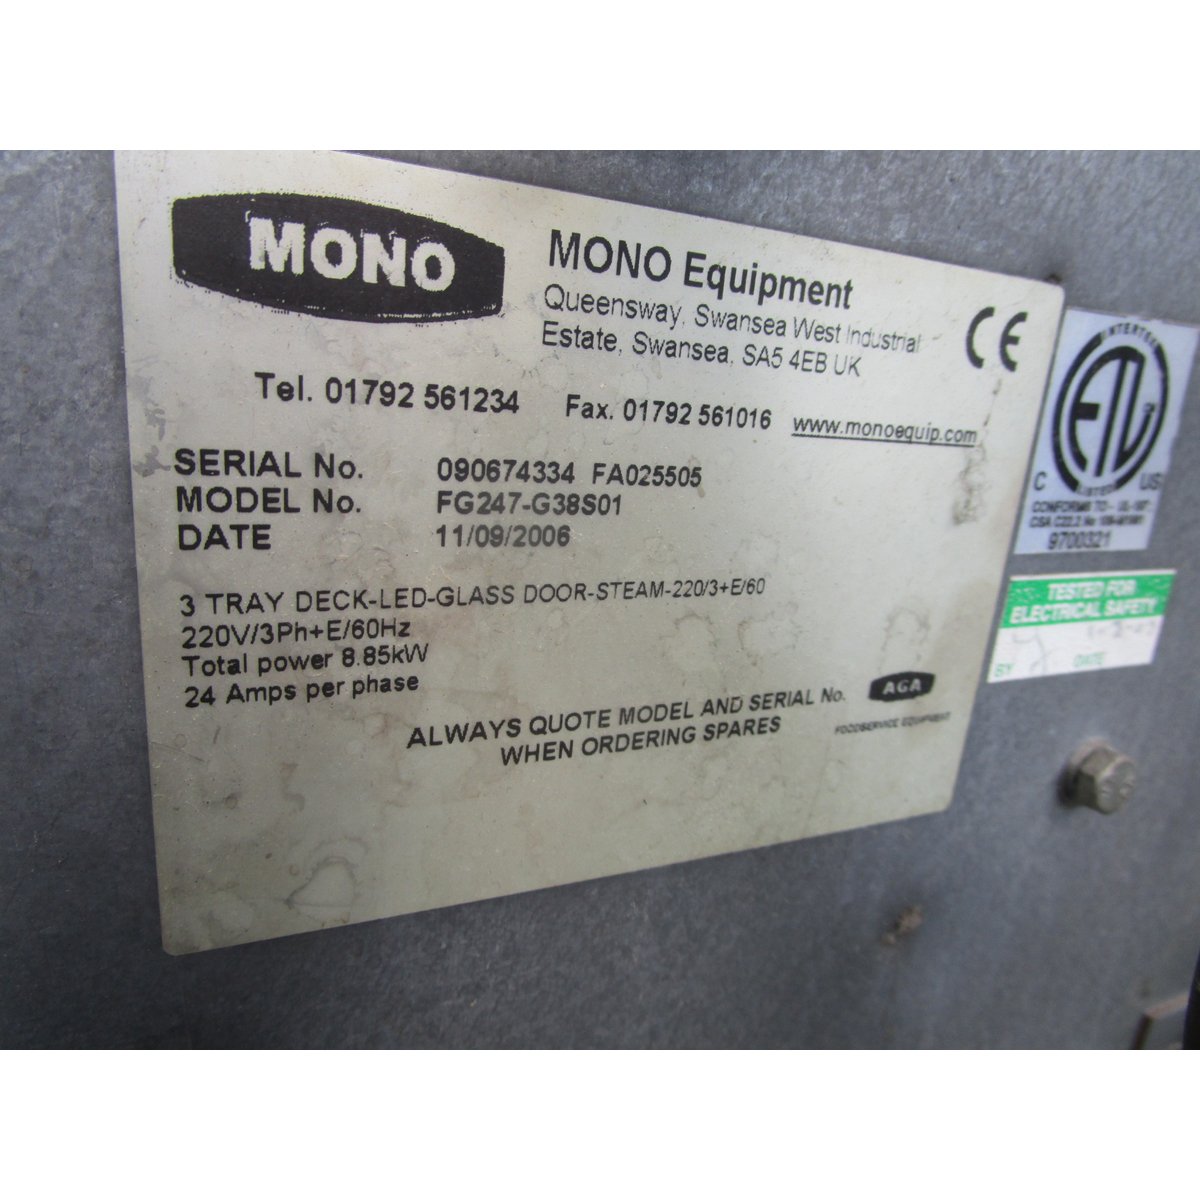 Mono FG247-G28S01 Electric 3 Deck Oven, Used Good Condition image 10